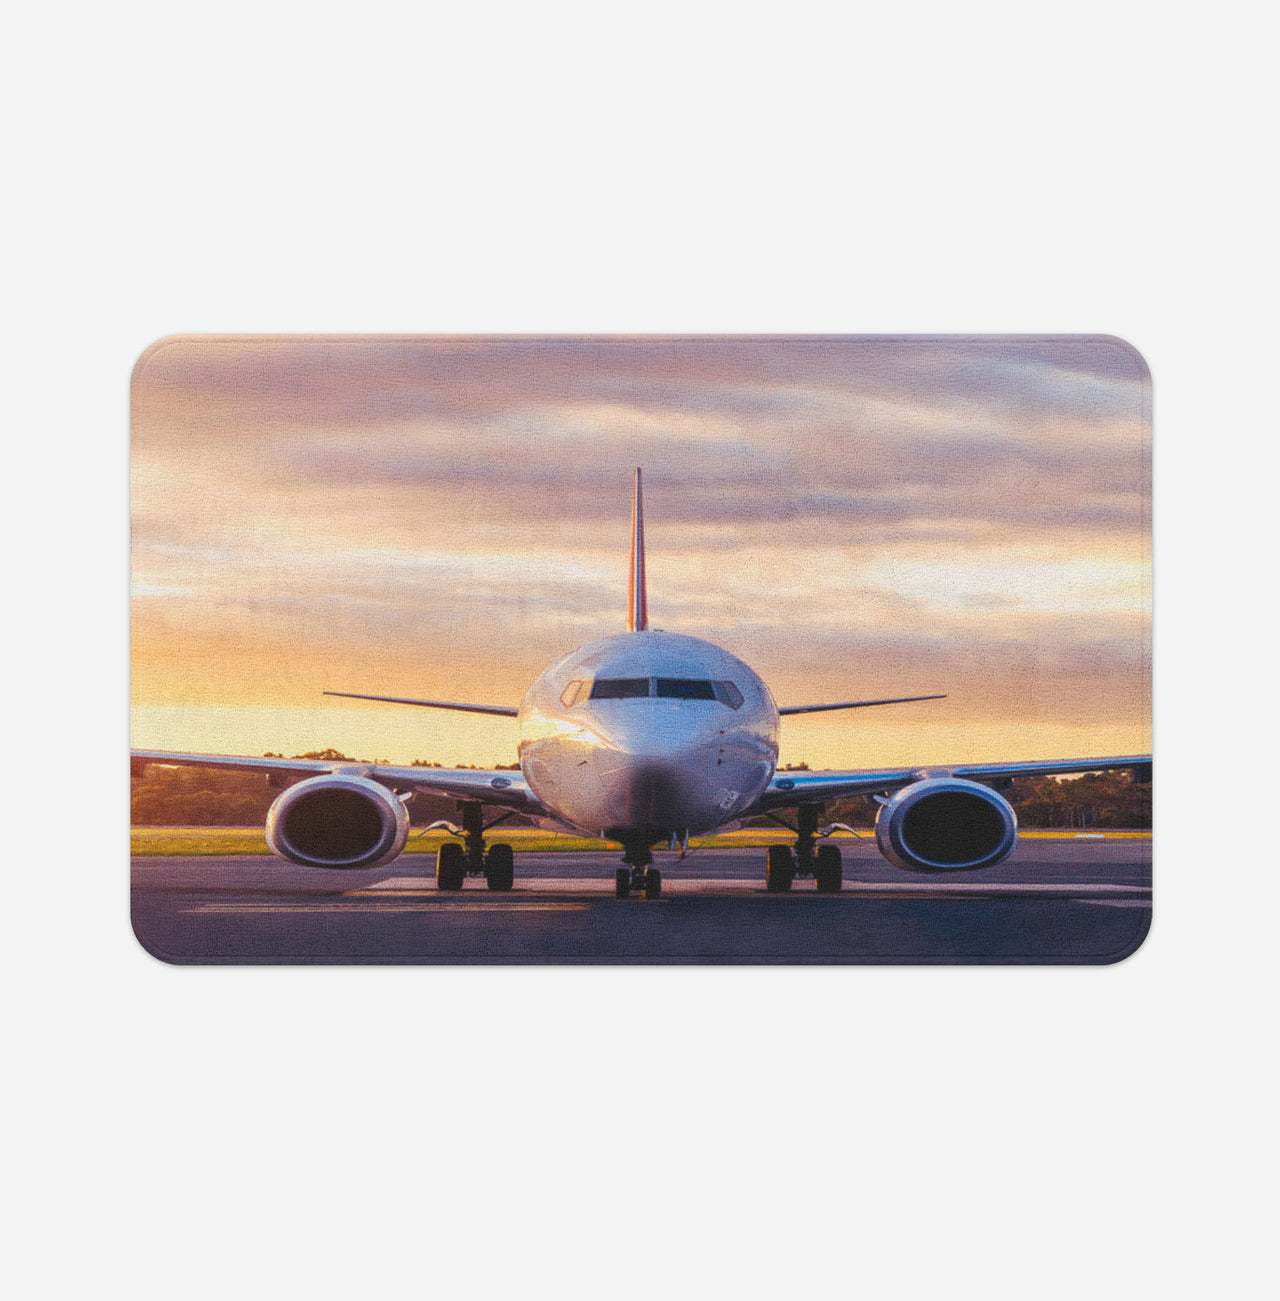 Face to Face with Boeing 737-800 During Sunset Designed Bath Mats